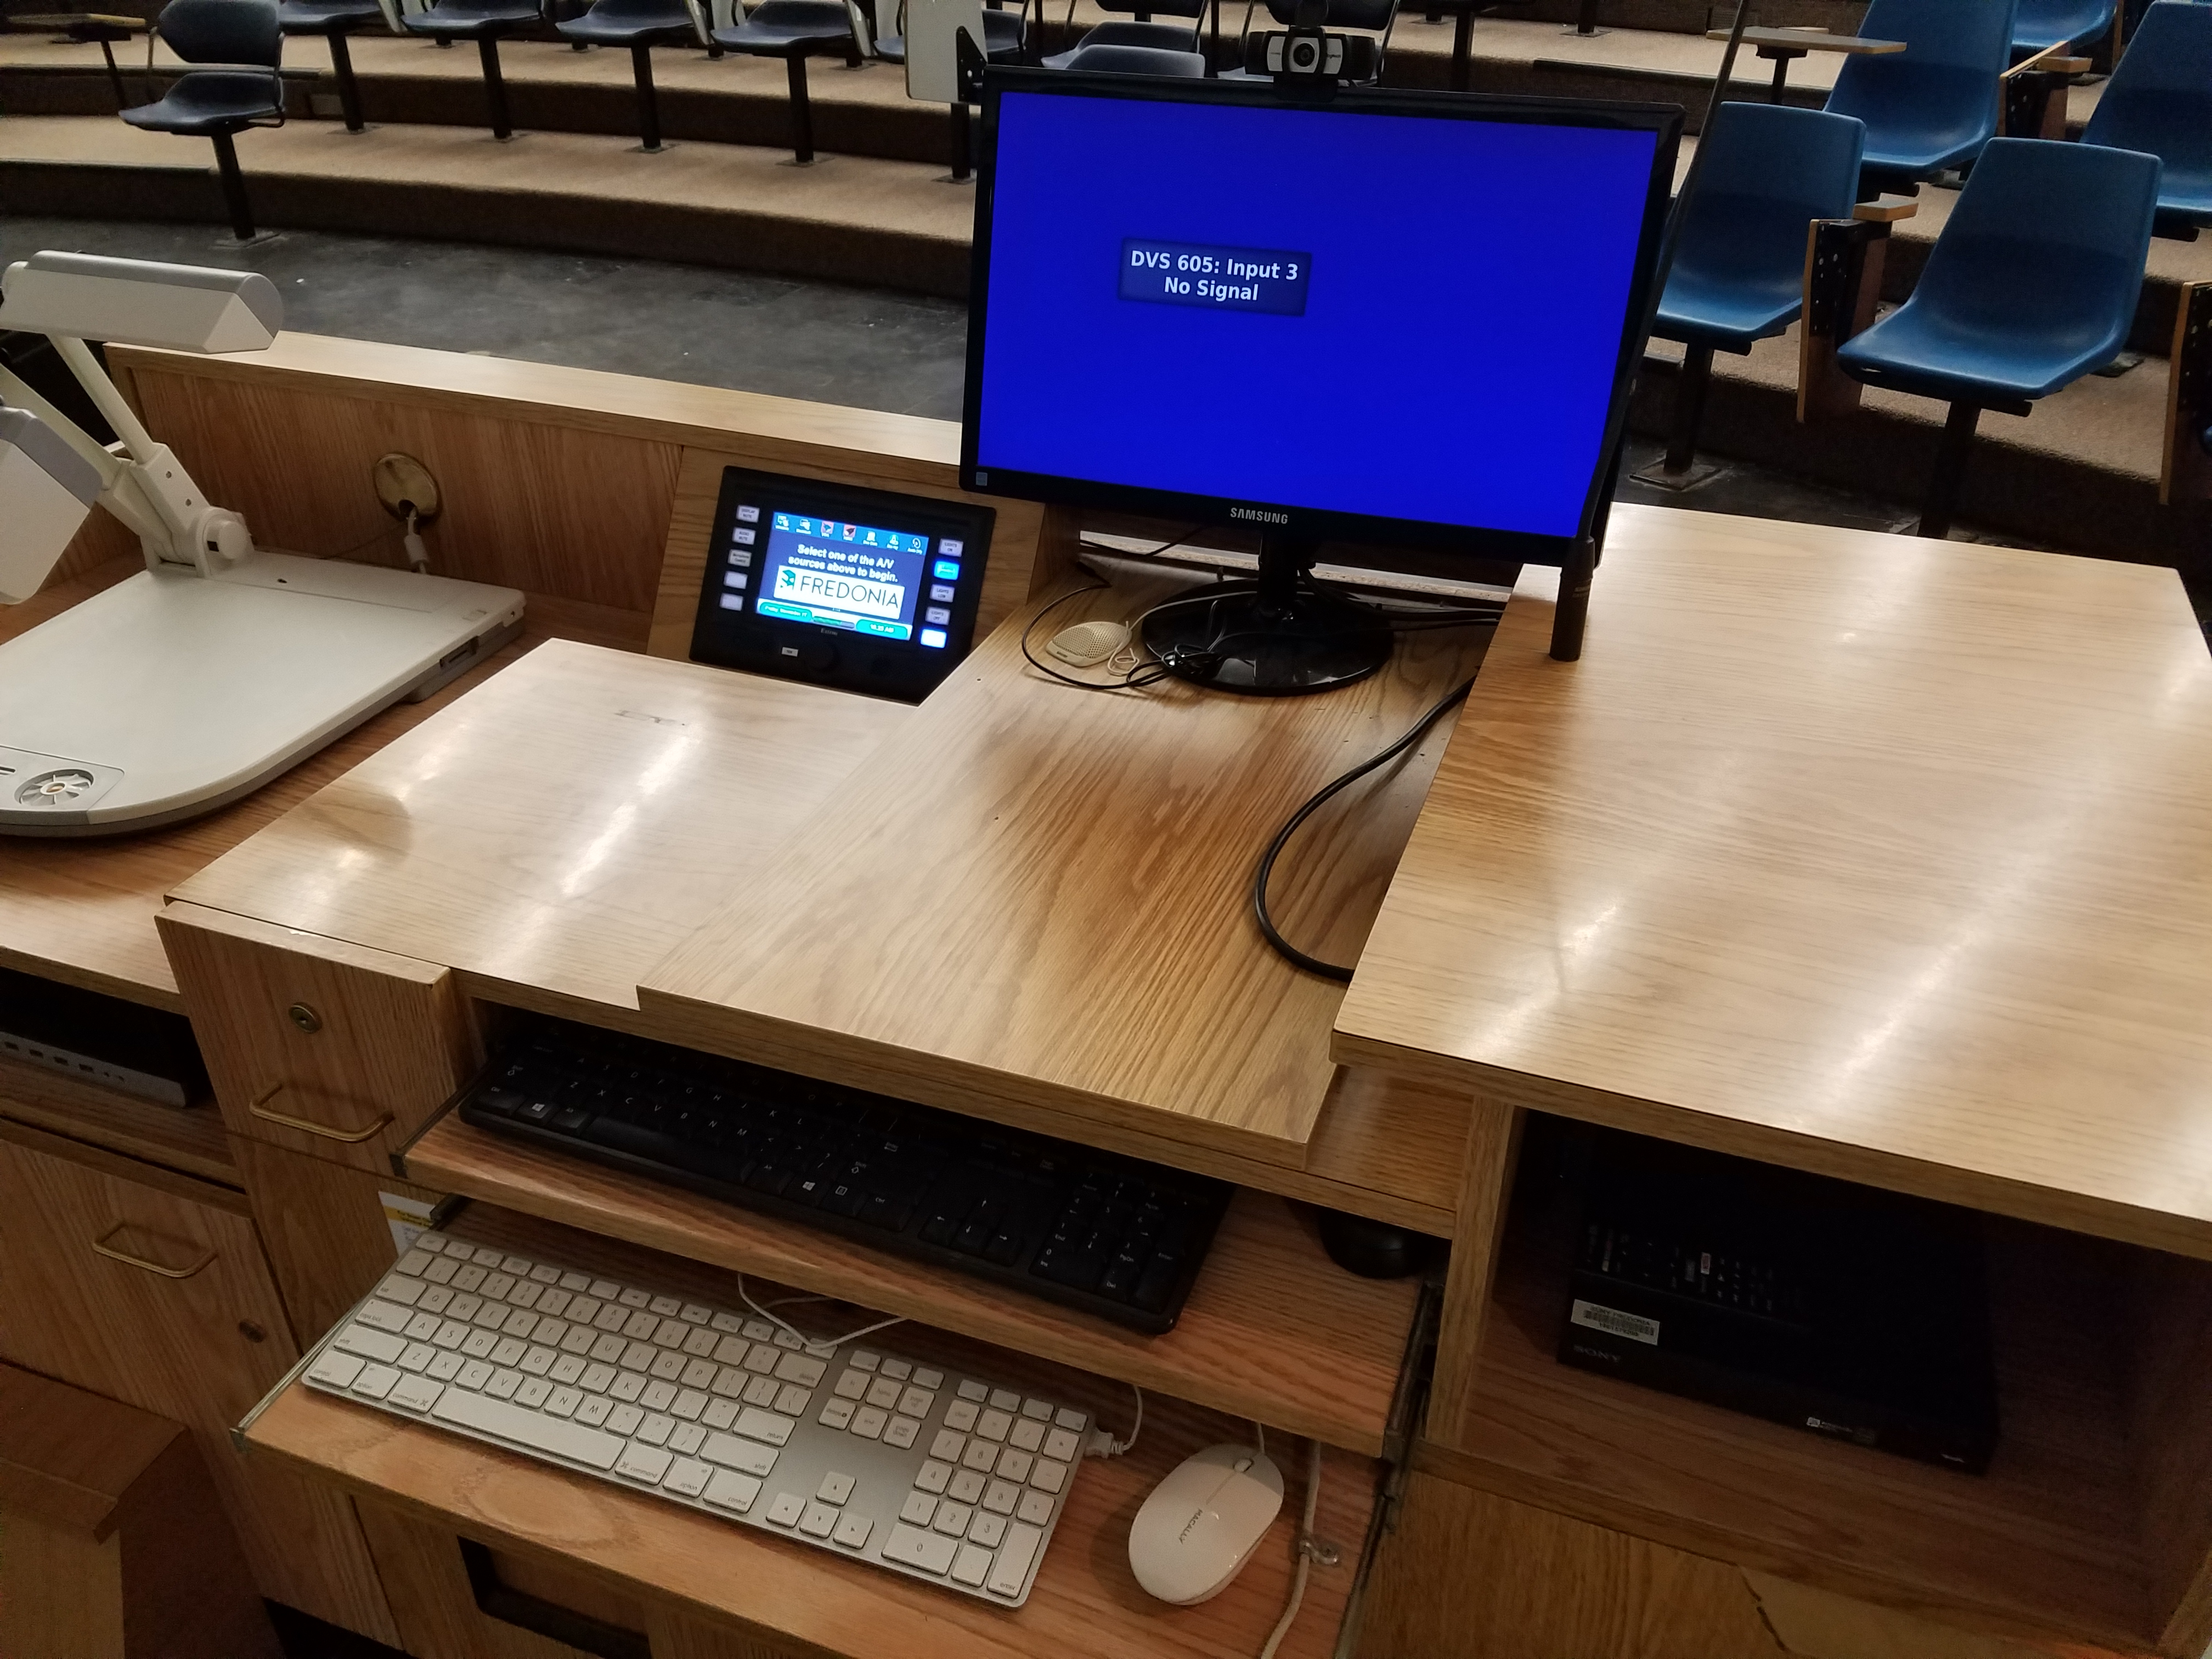 Teachers station set up with a computer monitor and keyboard.